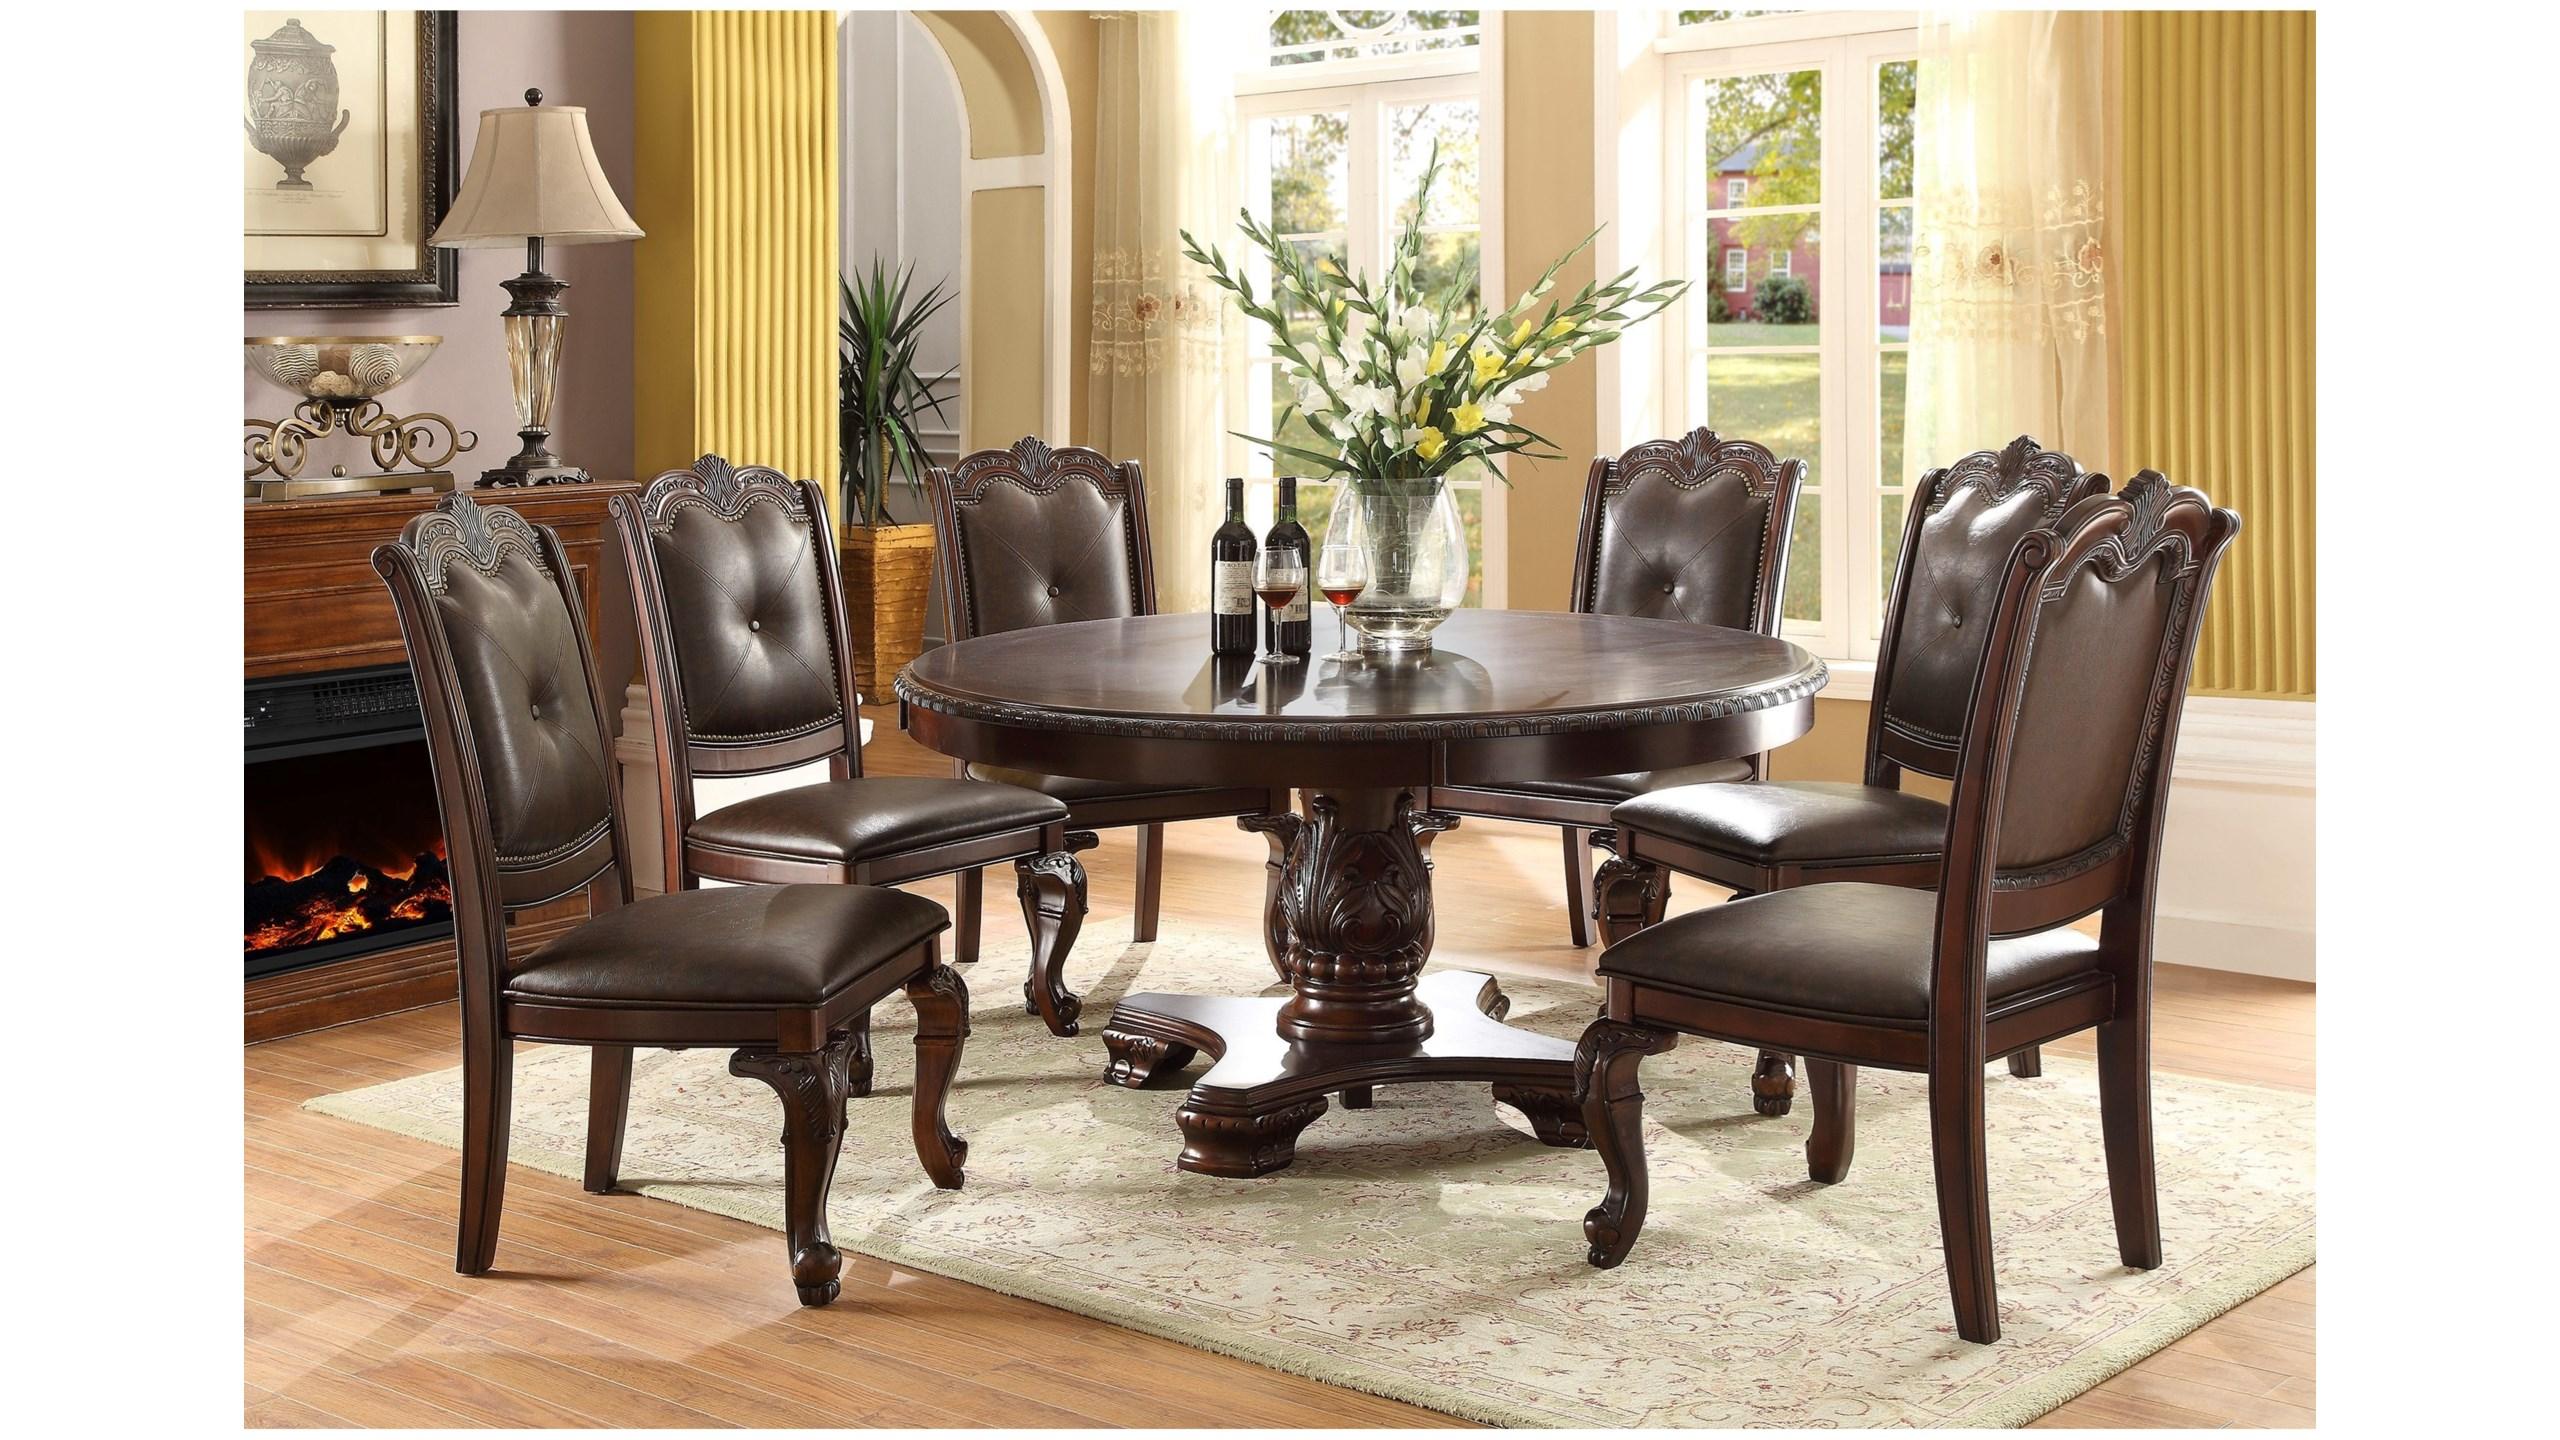 

    
Espresso Dining Round Table + 8 Chairs by Crown Mark Kiera 2150T-60-9pcs
